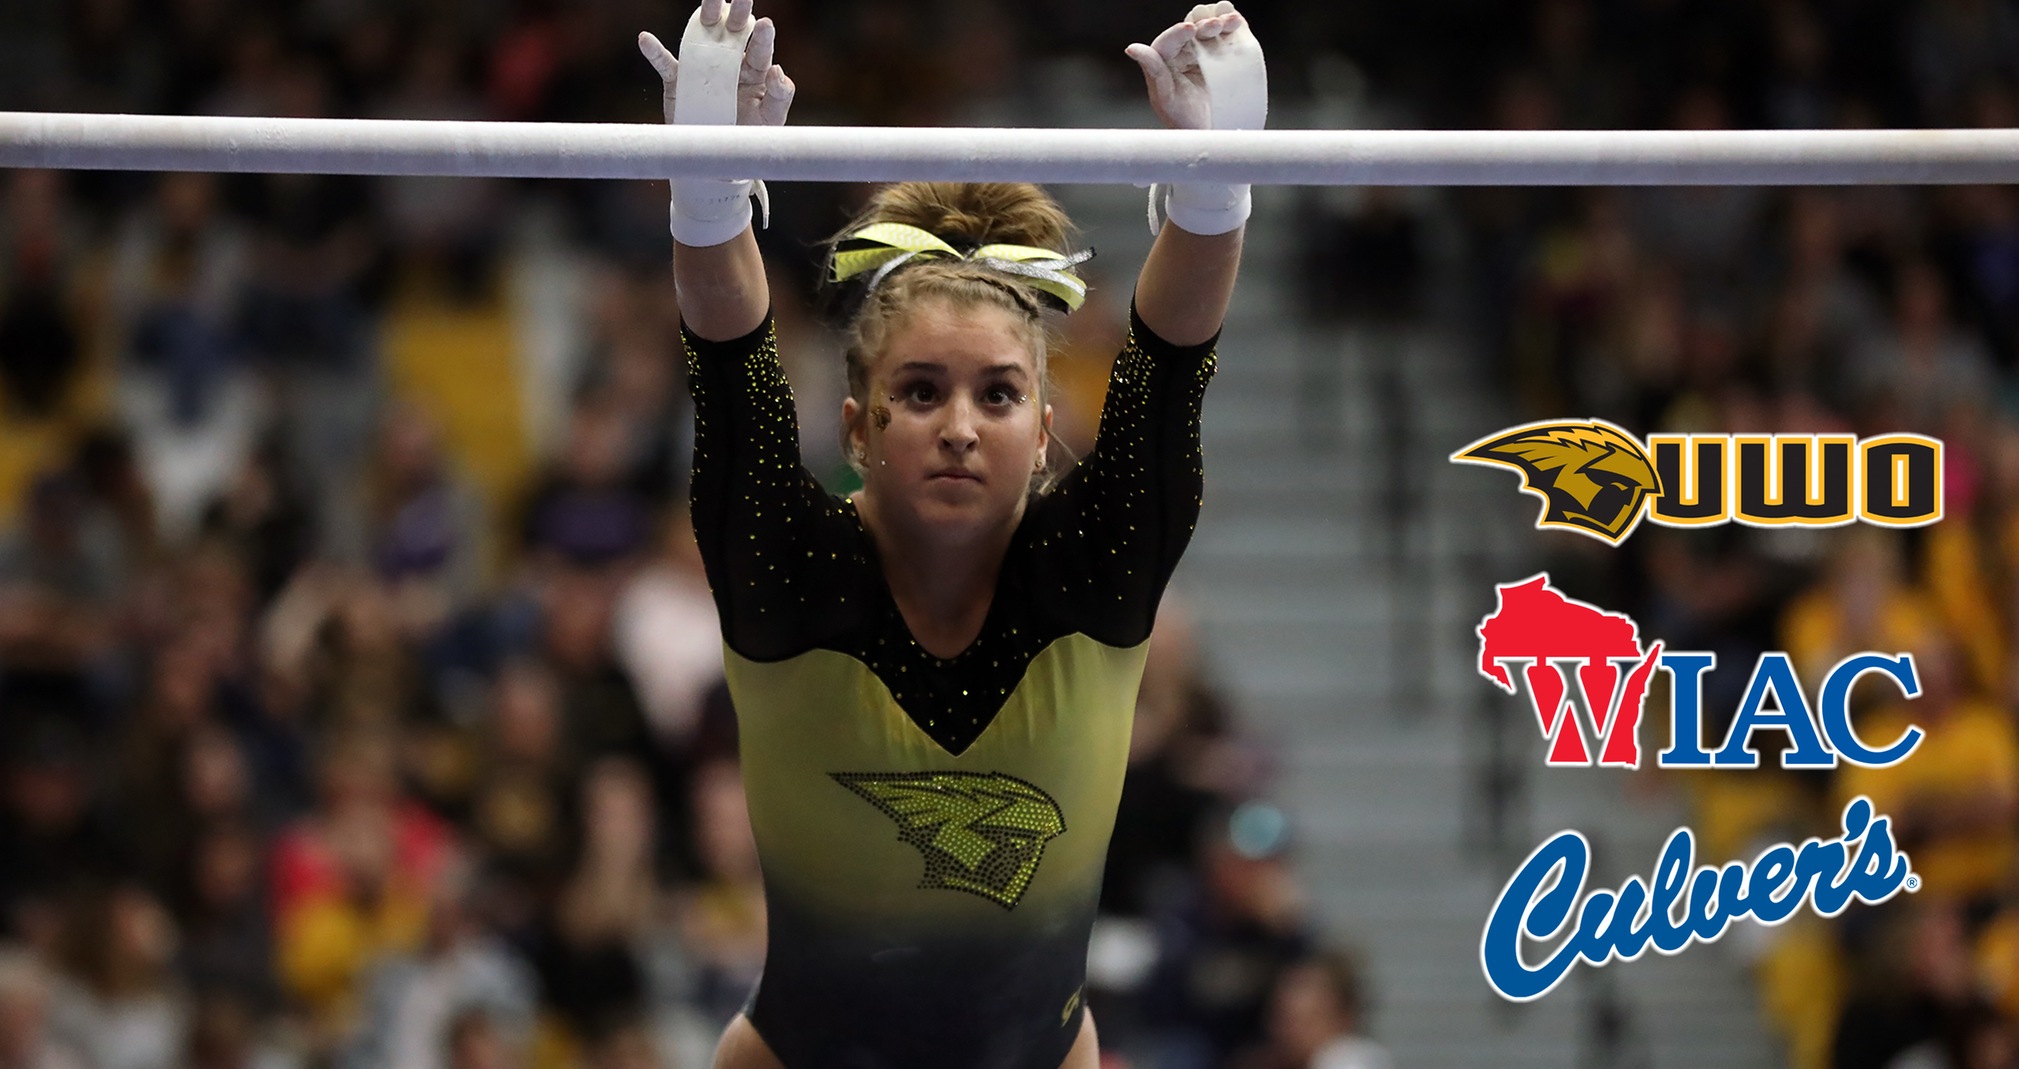 Emily Gilot earned All-America awards in the floor exercise and on the vault at the 2019 NCGA Championship.